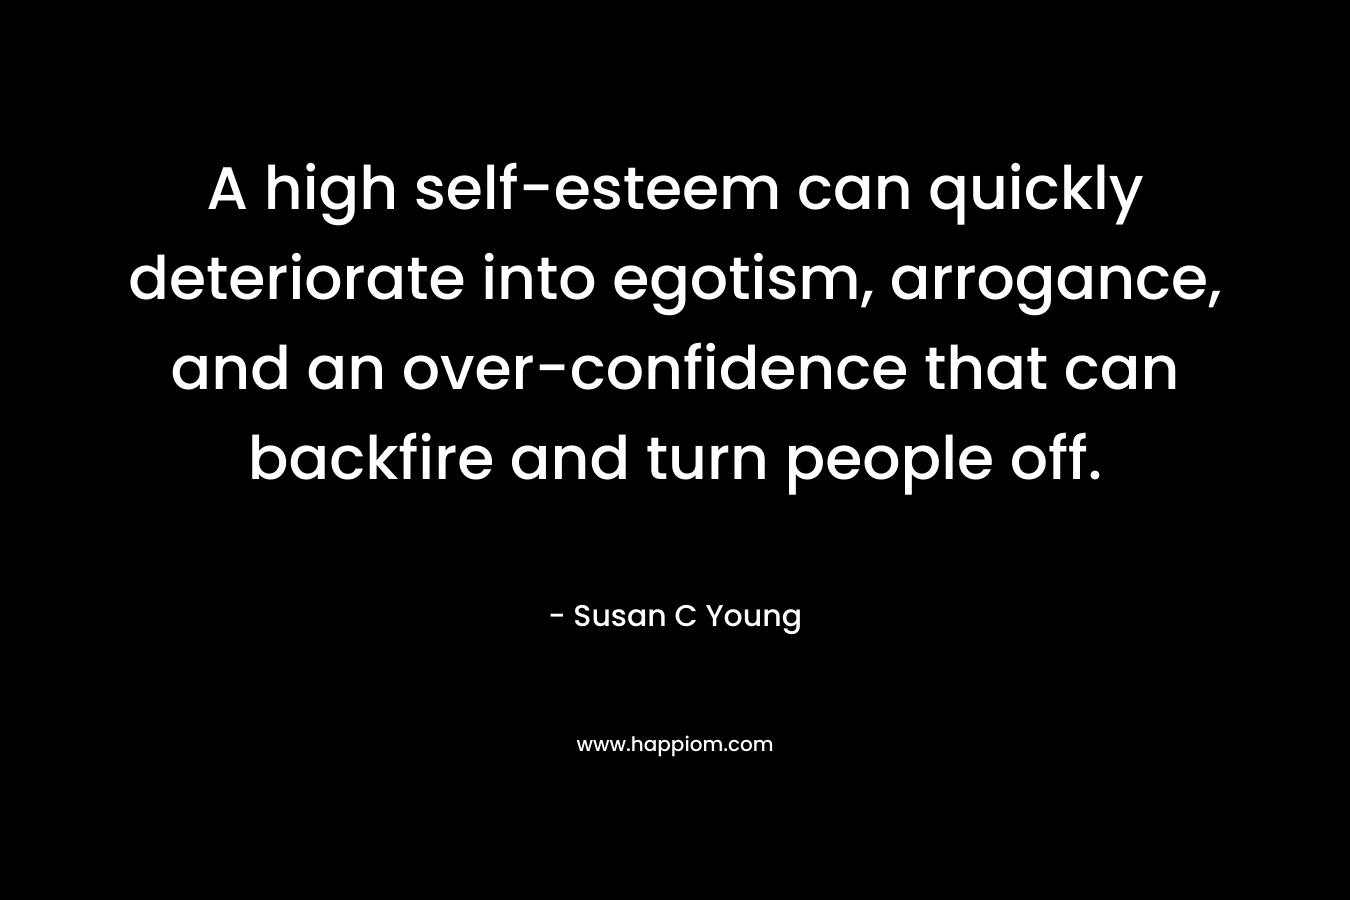 A high self-esteem can quickly deteriorate into egotism, arrogance, and an over-confidence that can backfire and turn people off. – Susan C Young